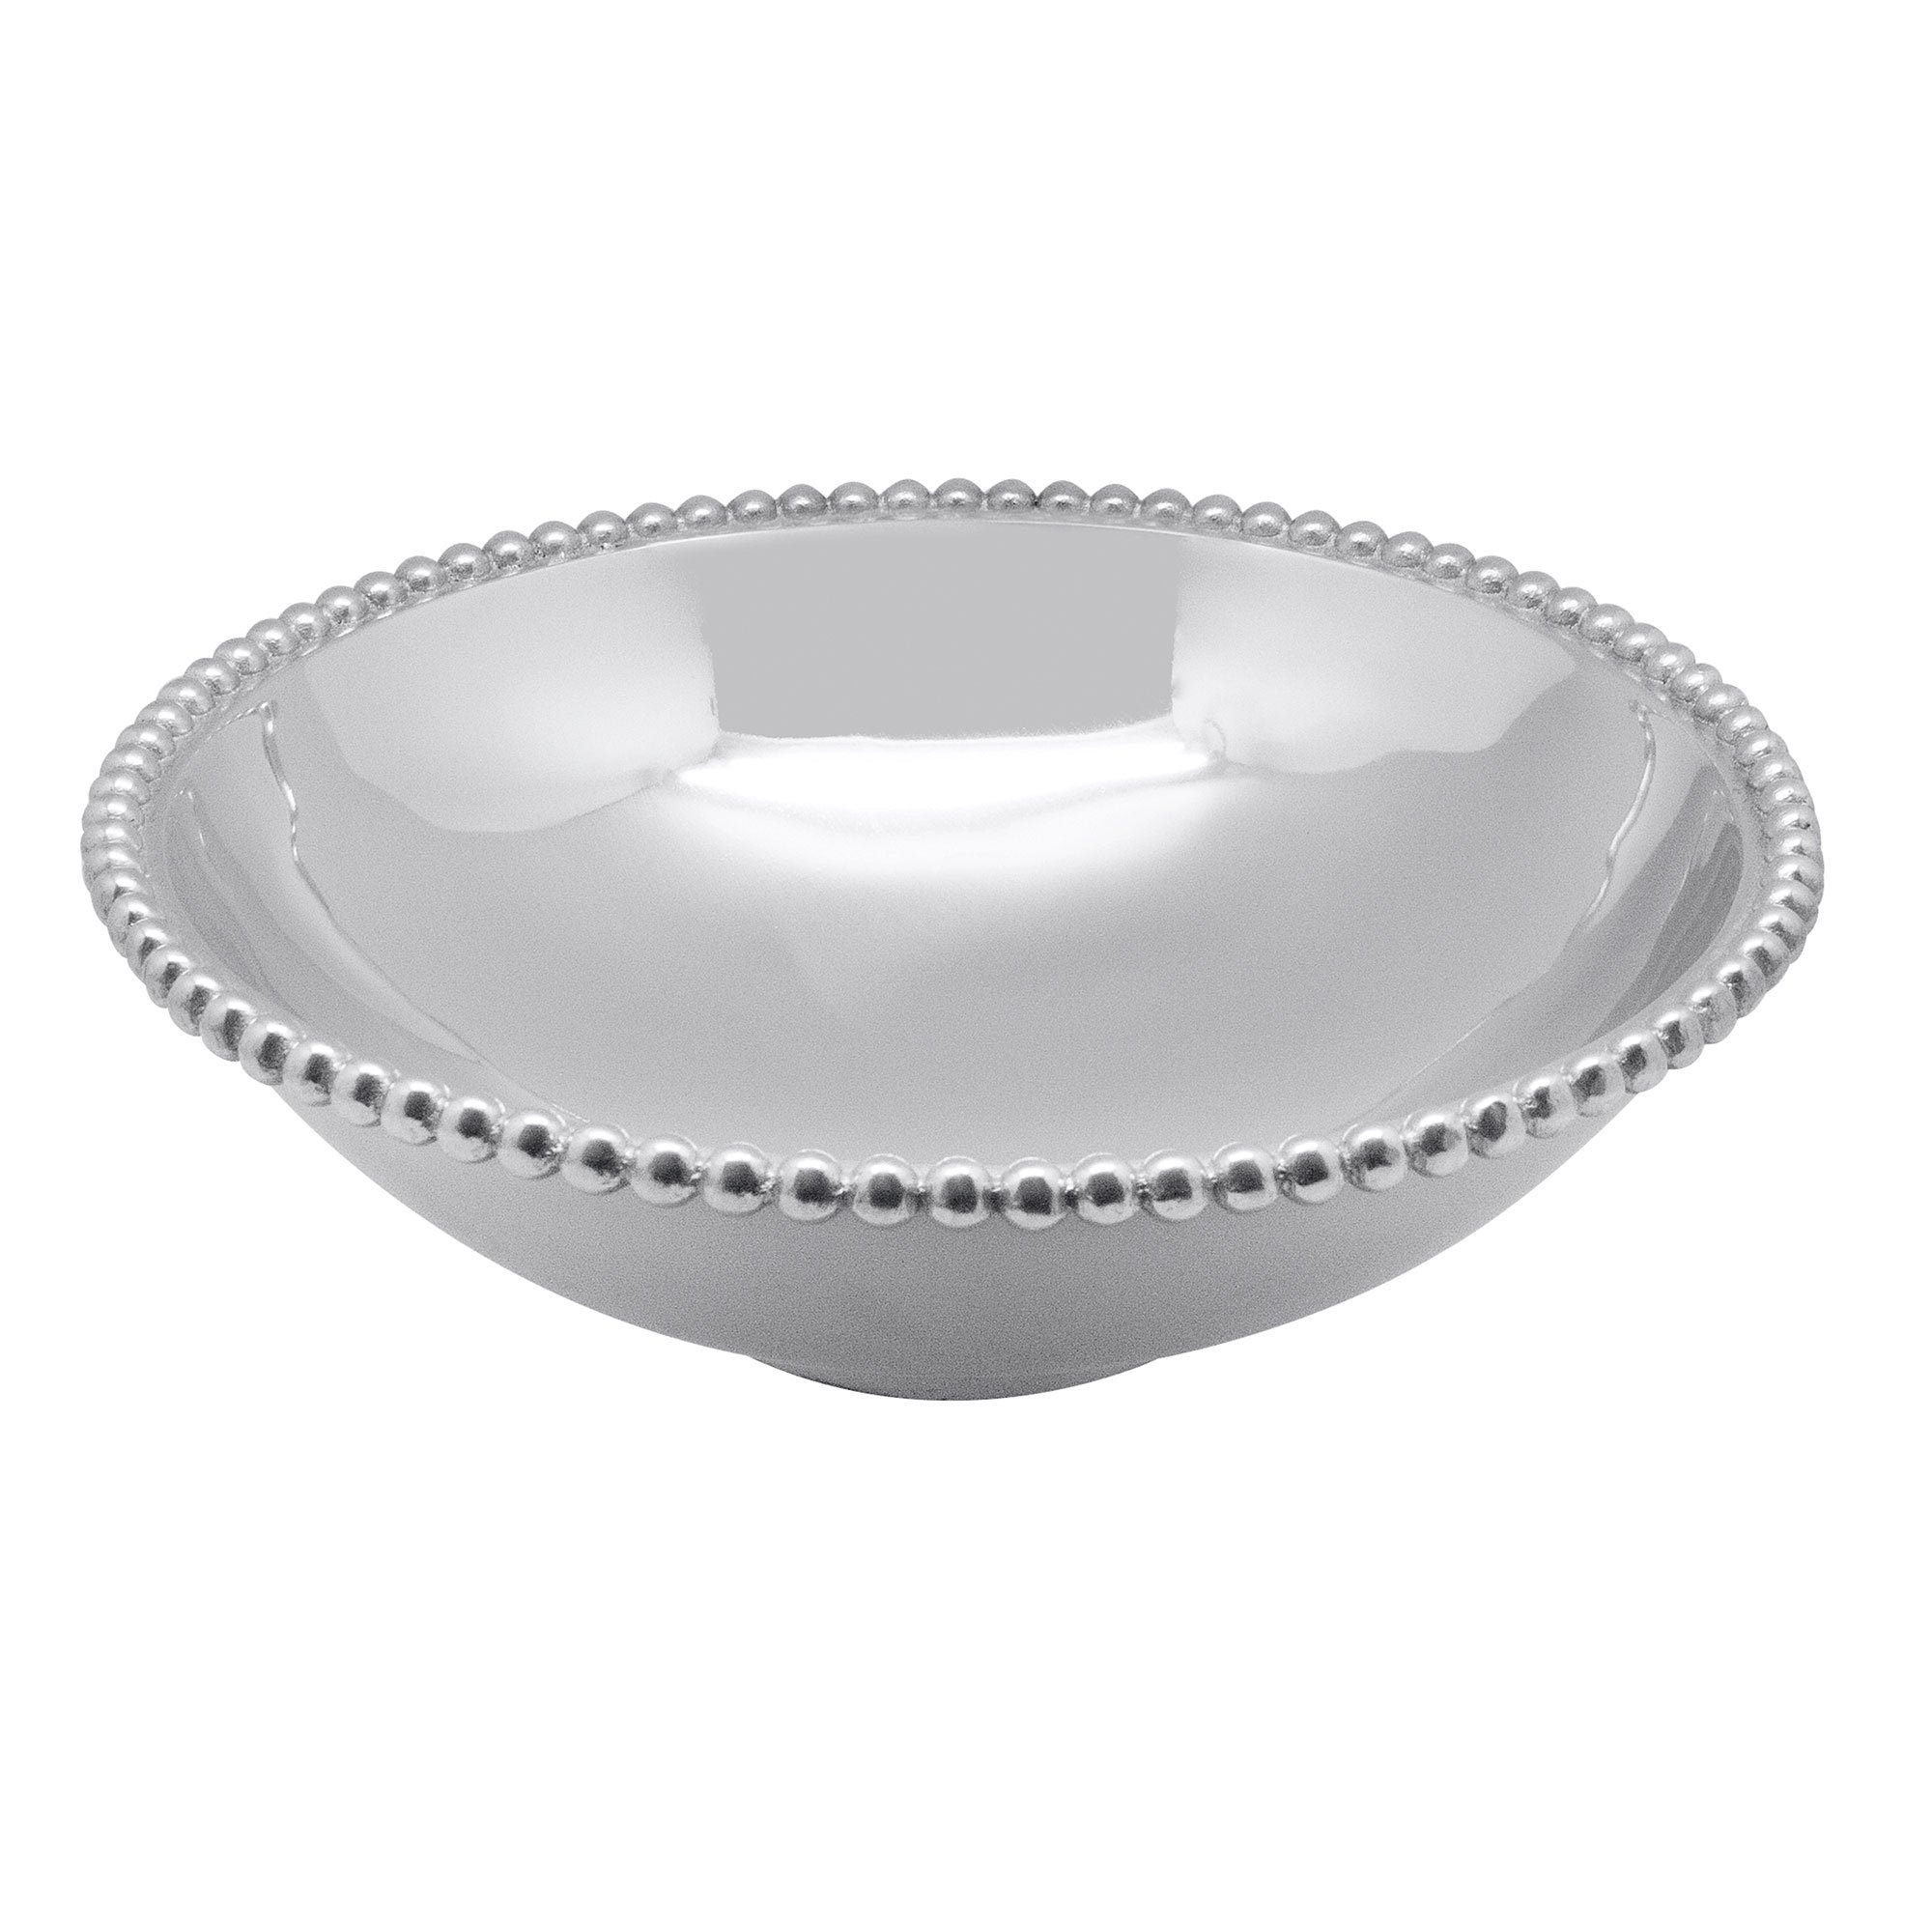 24586 - Large Pearled Serving Bowl - $196- Purchased 